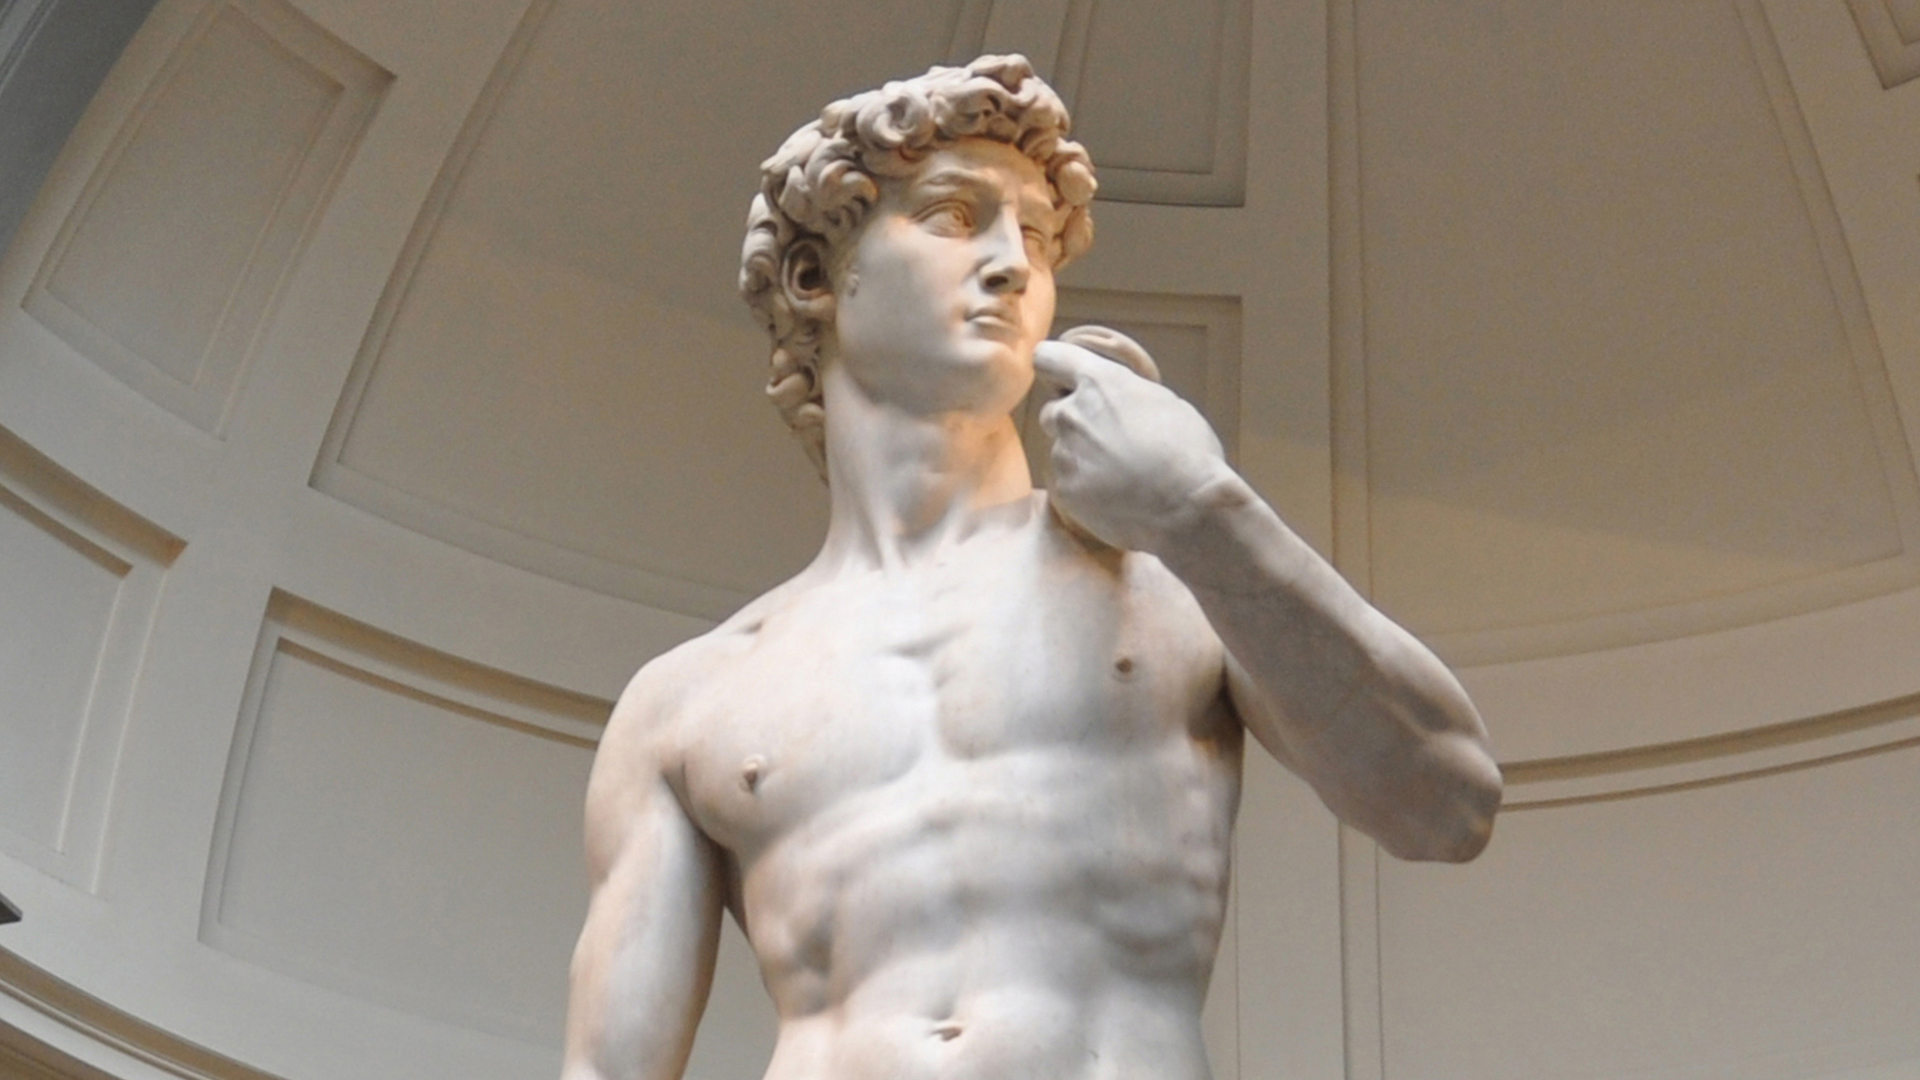 David (1504), Michelangelo, Accademia Gallery, Florence. Photo: Rick Steves’ Europe.